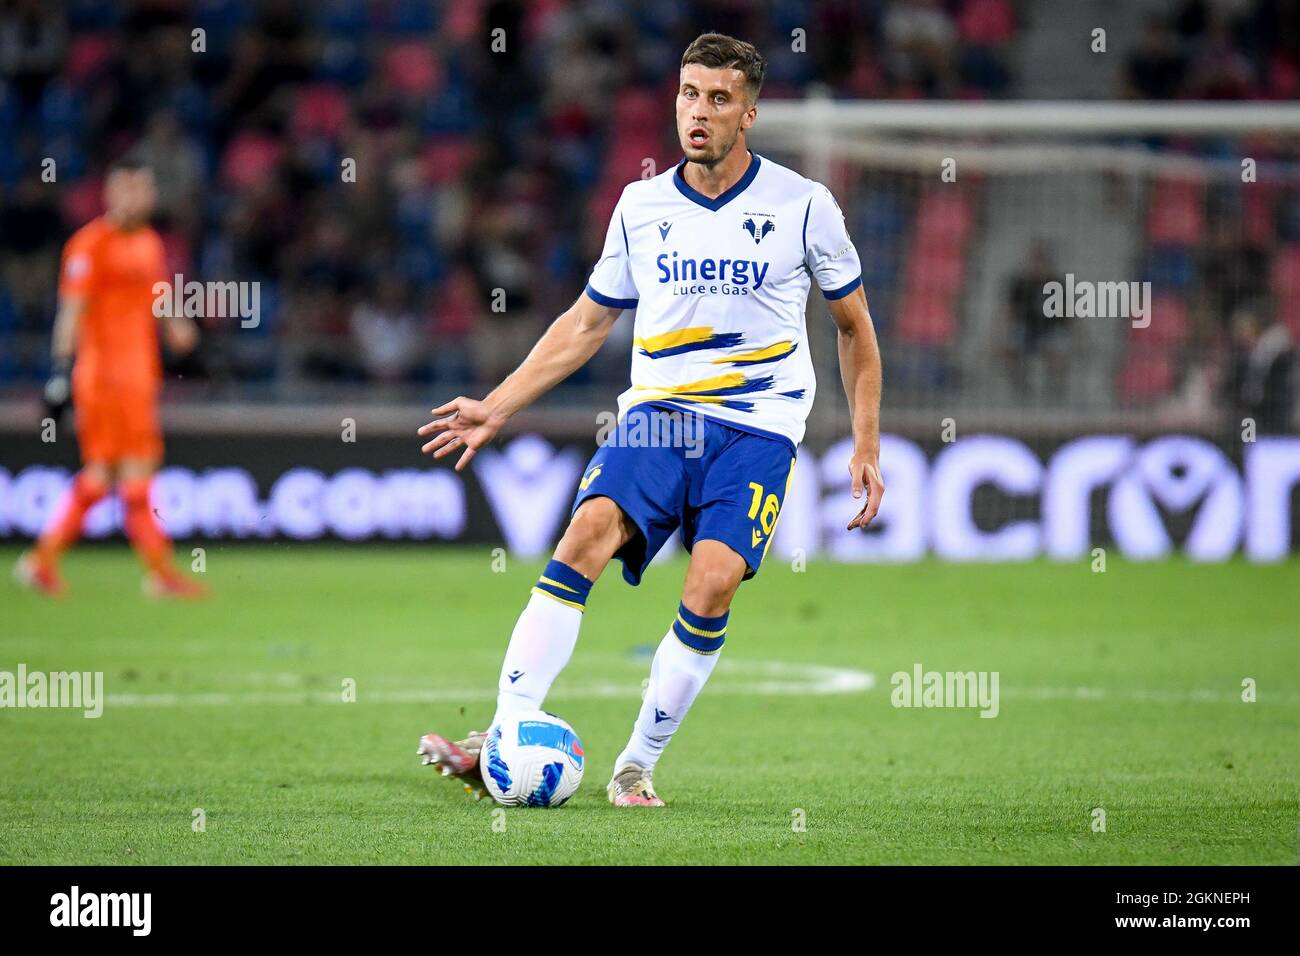 Bologna, Italy. 13th Sep, 2021. Nicolo Casale (Verona) portrait in action during Bologna FC vs Hellas Verona FC, Italian football Serie A match in Bologna, Italy, September 13 2021 Credit: Independent Photo Agency/Alamy Live News Stock Photo